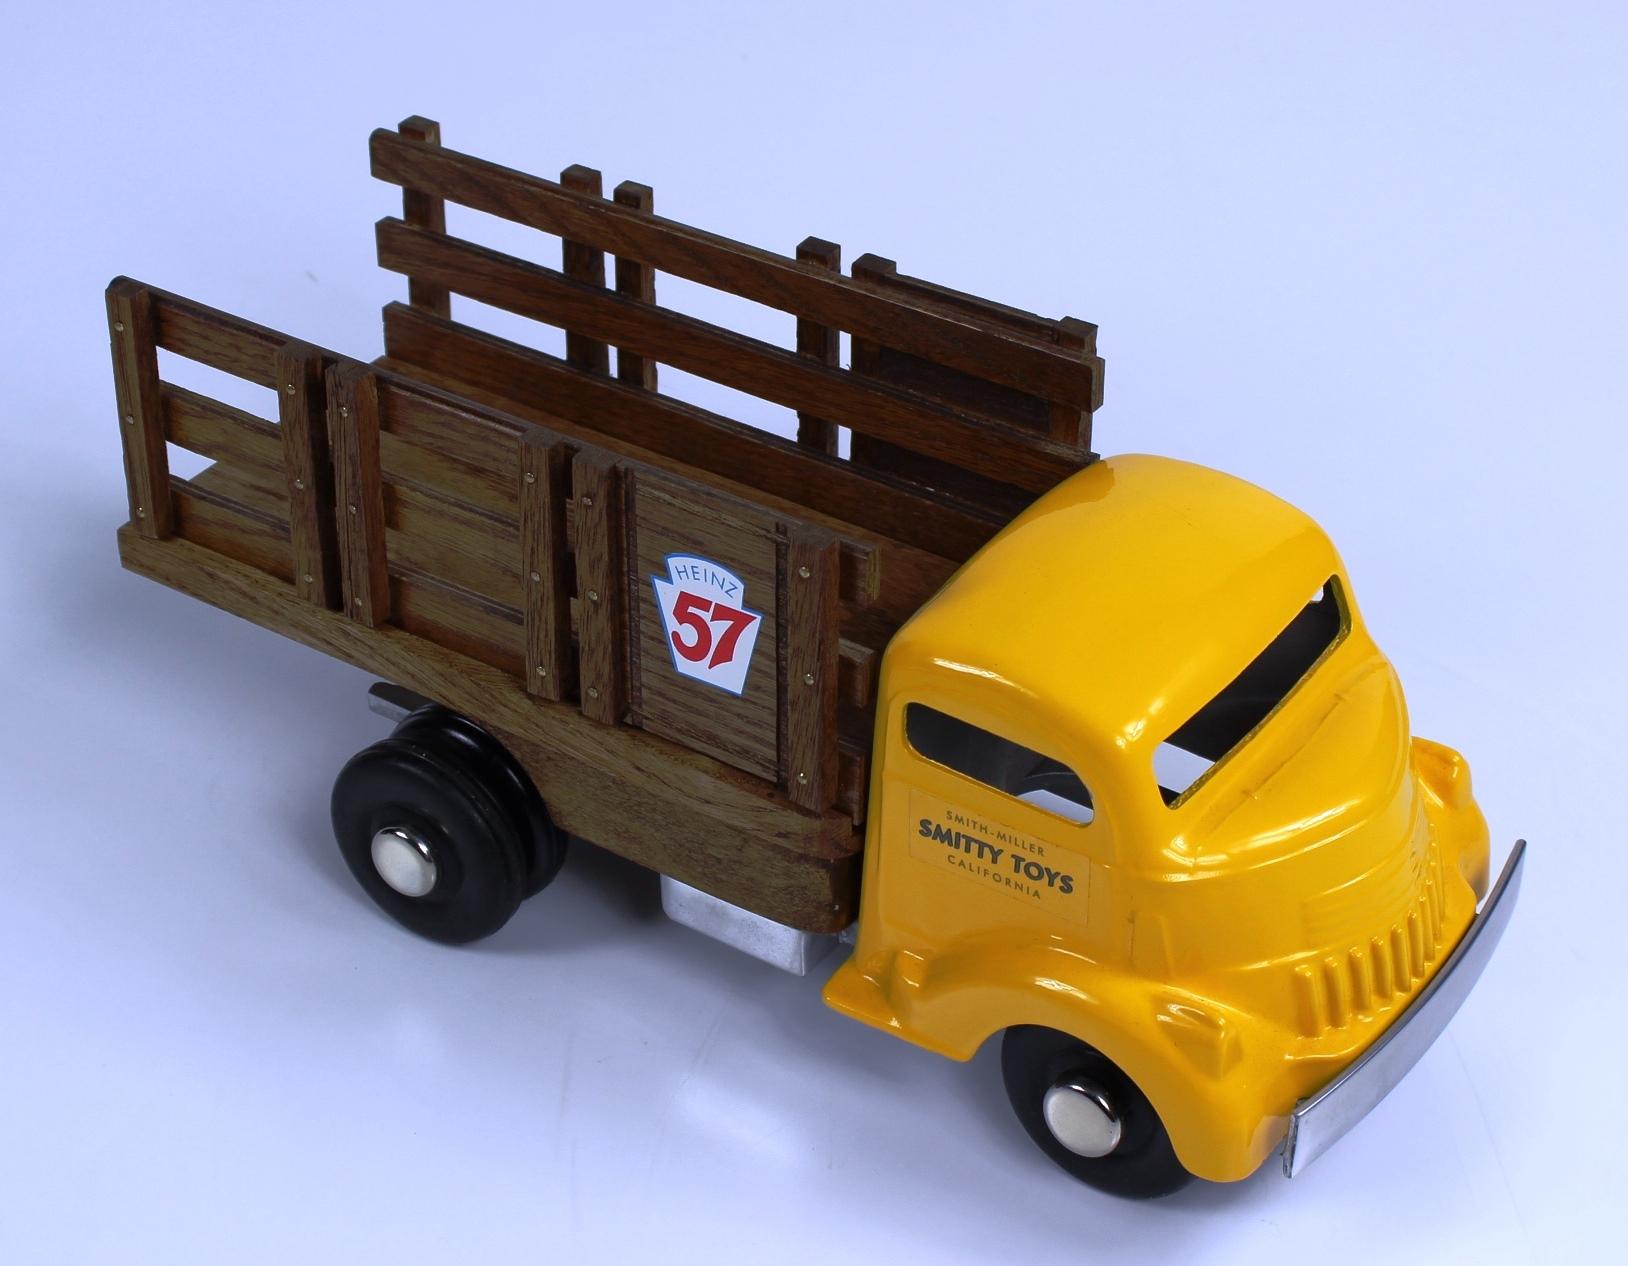 VINTAGE SMITH-MILLER SMITTY TOYS HEINZ 57 STAKE TRUCK 14" LONG